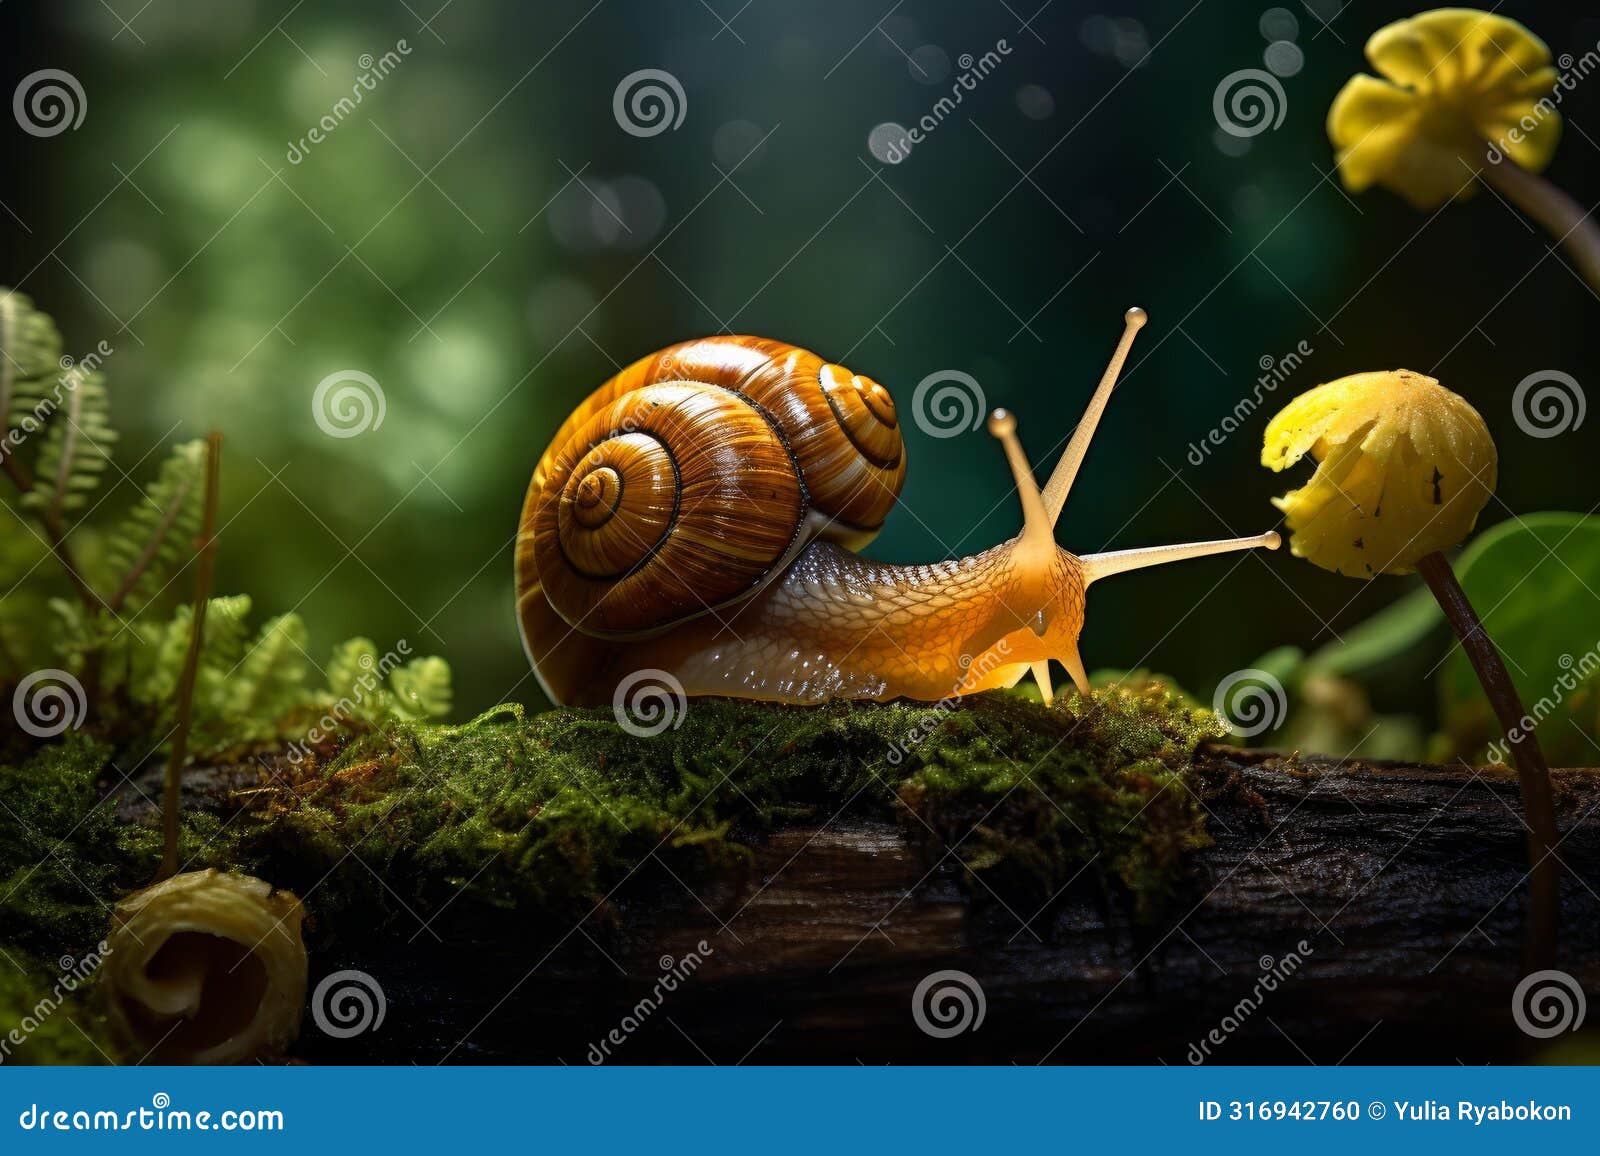 intriguing nature snail on tree. generate ai